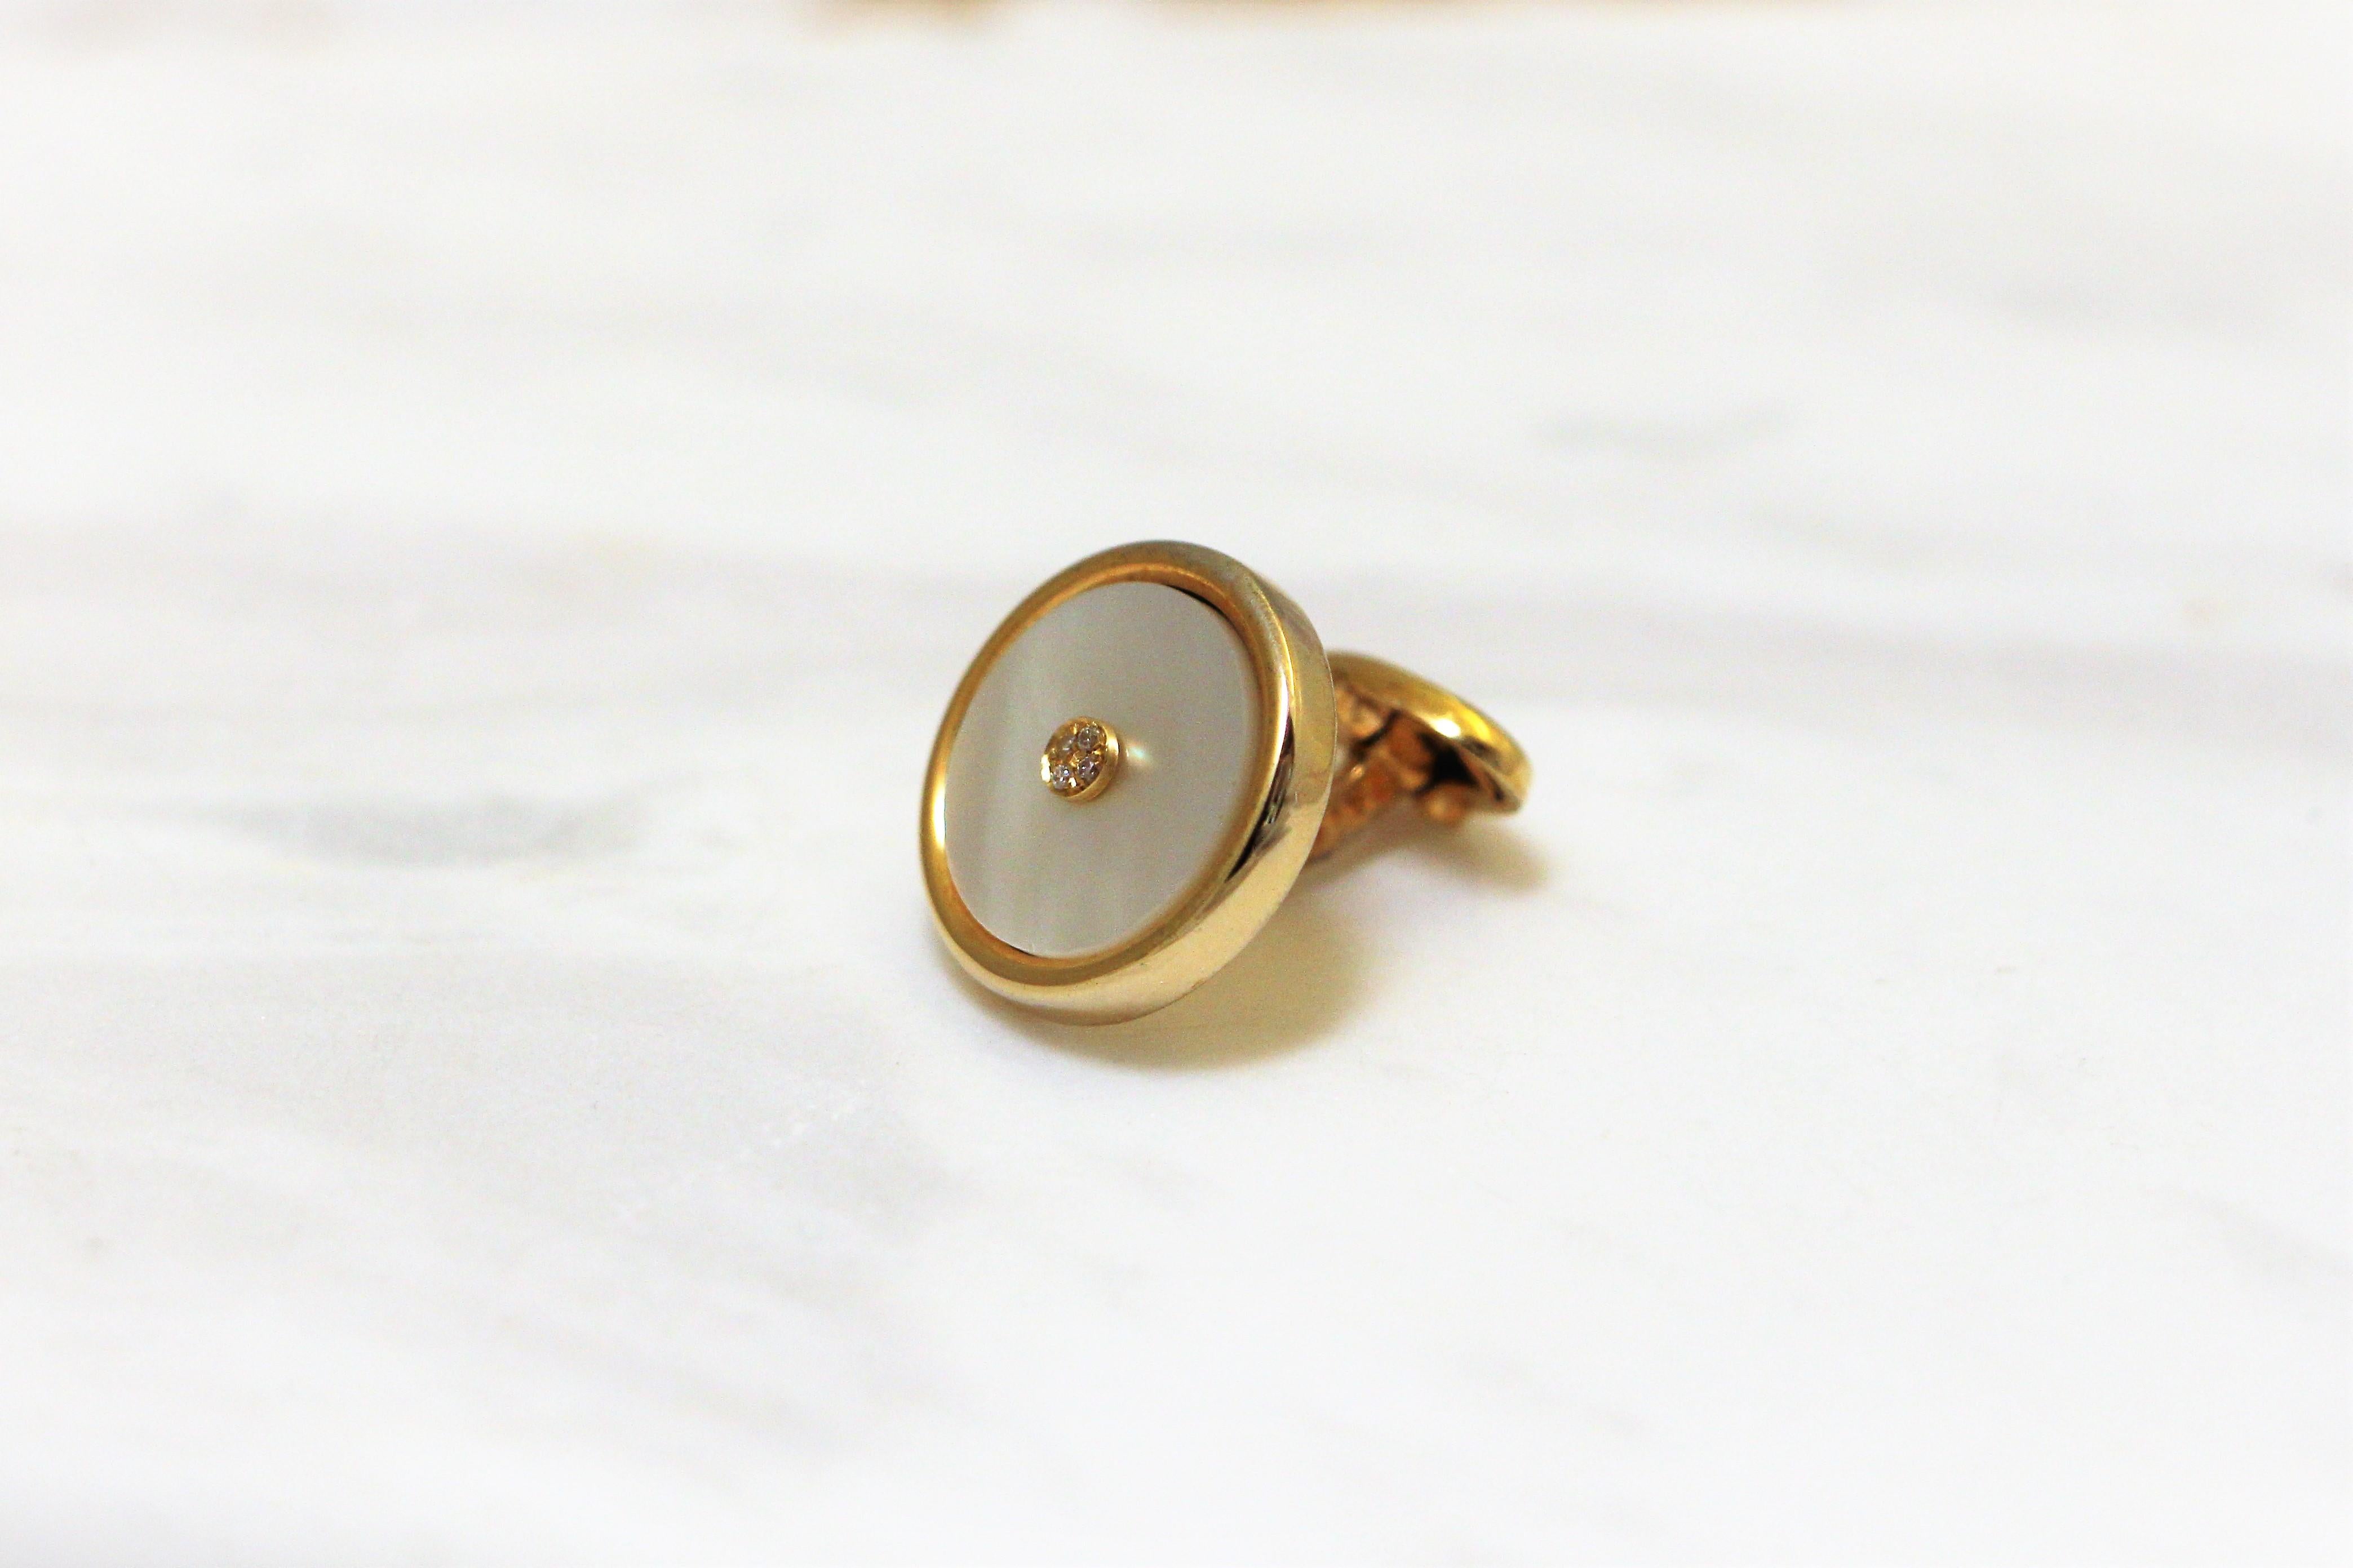 Mother of Pearl round cufflinks handcrafted in 14Kt yellow gold with pave brilliant cut diamond centre.
There is no shape more complete and more eternal, than a circle. These Cufflinks are a statement of classiness. They belong to Metalloplasies